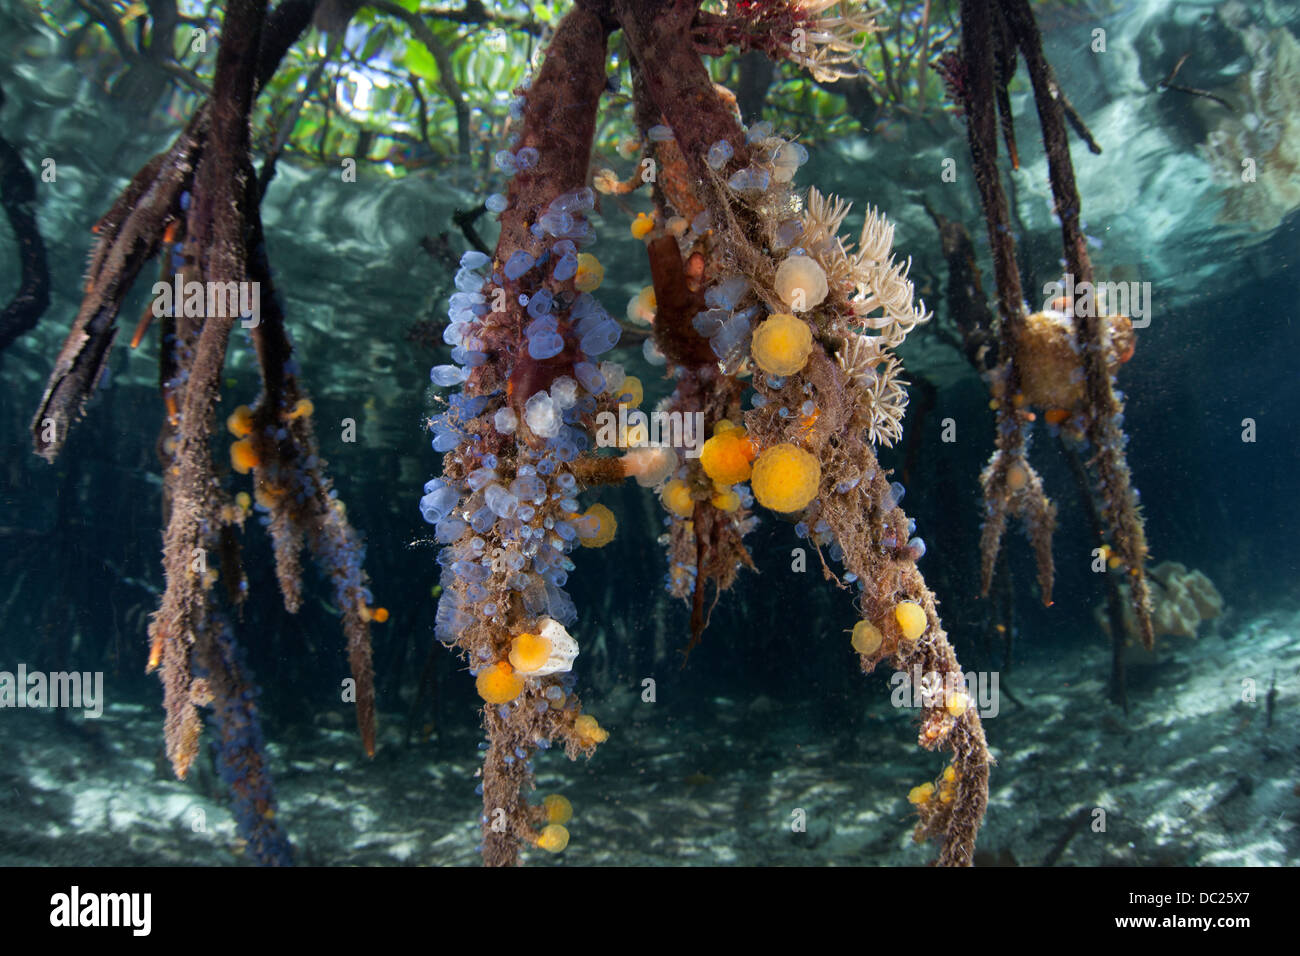 Tunicates covering Mangroves Roots, Rhopalaea sp., Raja Ampat, West Papua, Indonesia Stock Photo